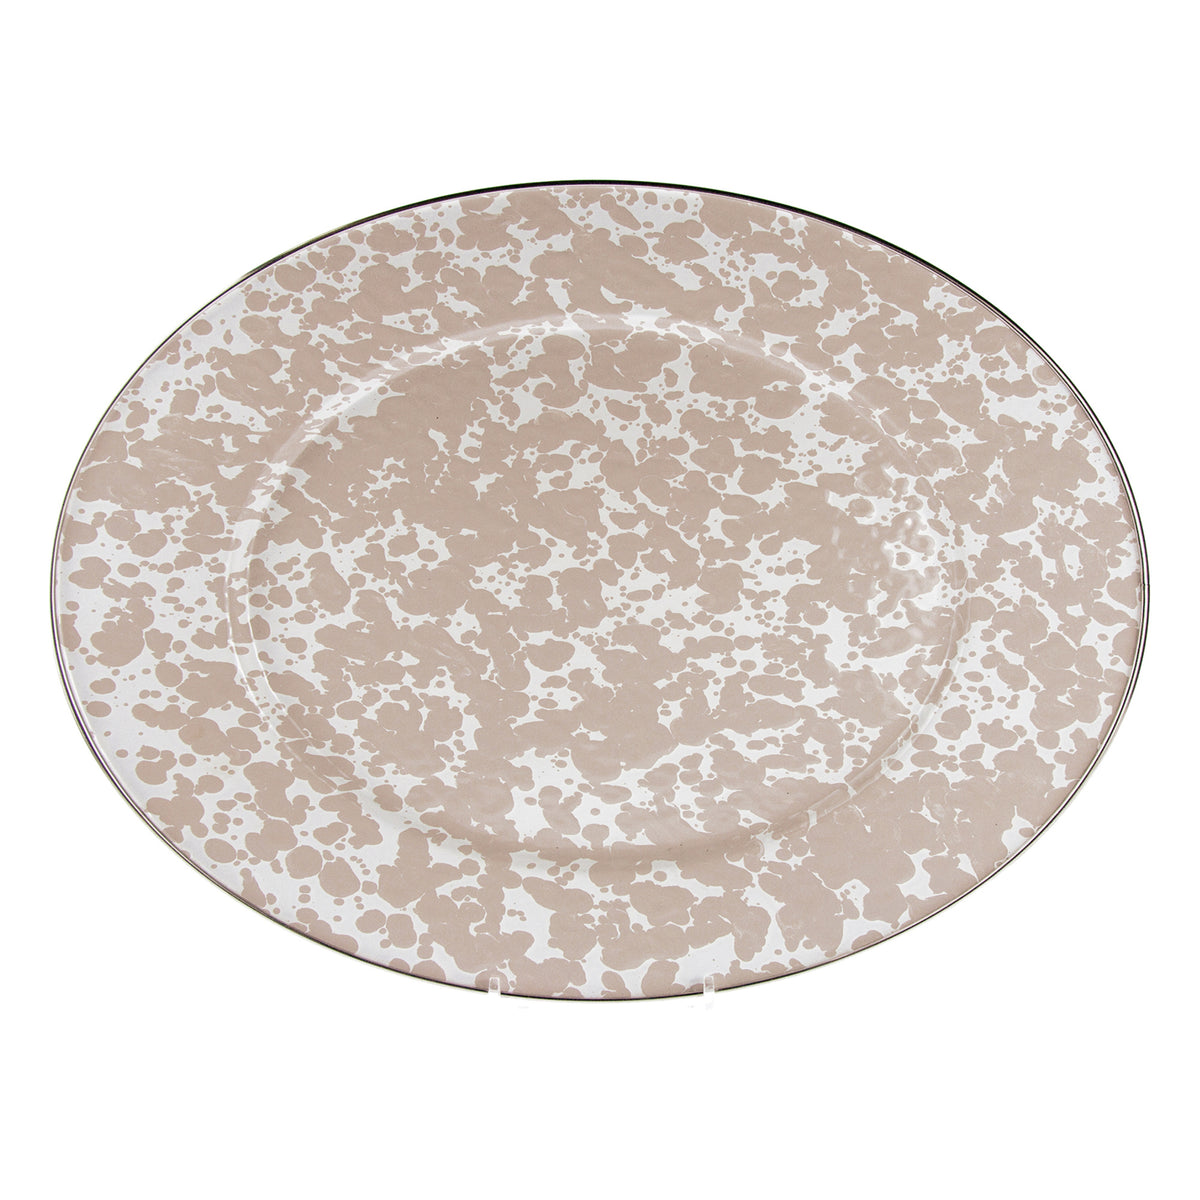 Oval Platter in Taupe Swirl